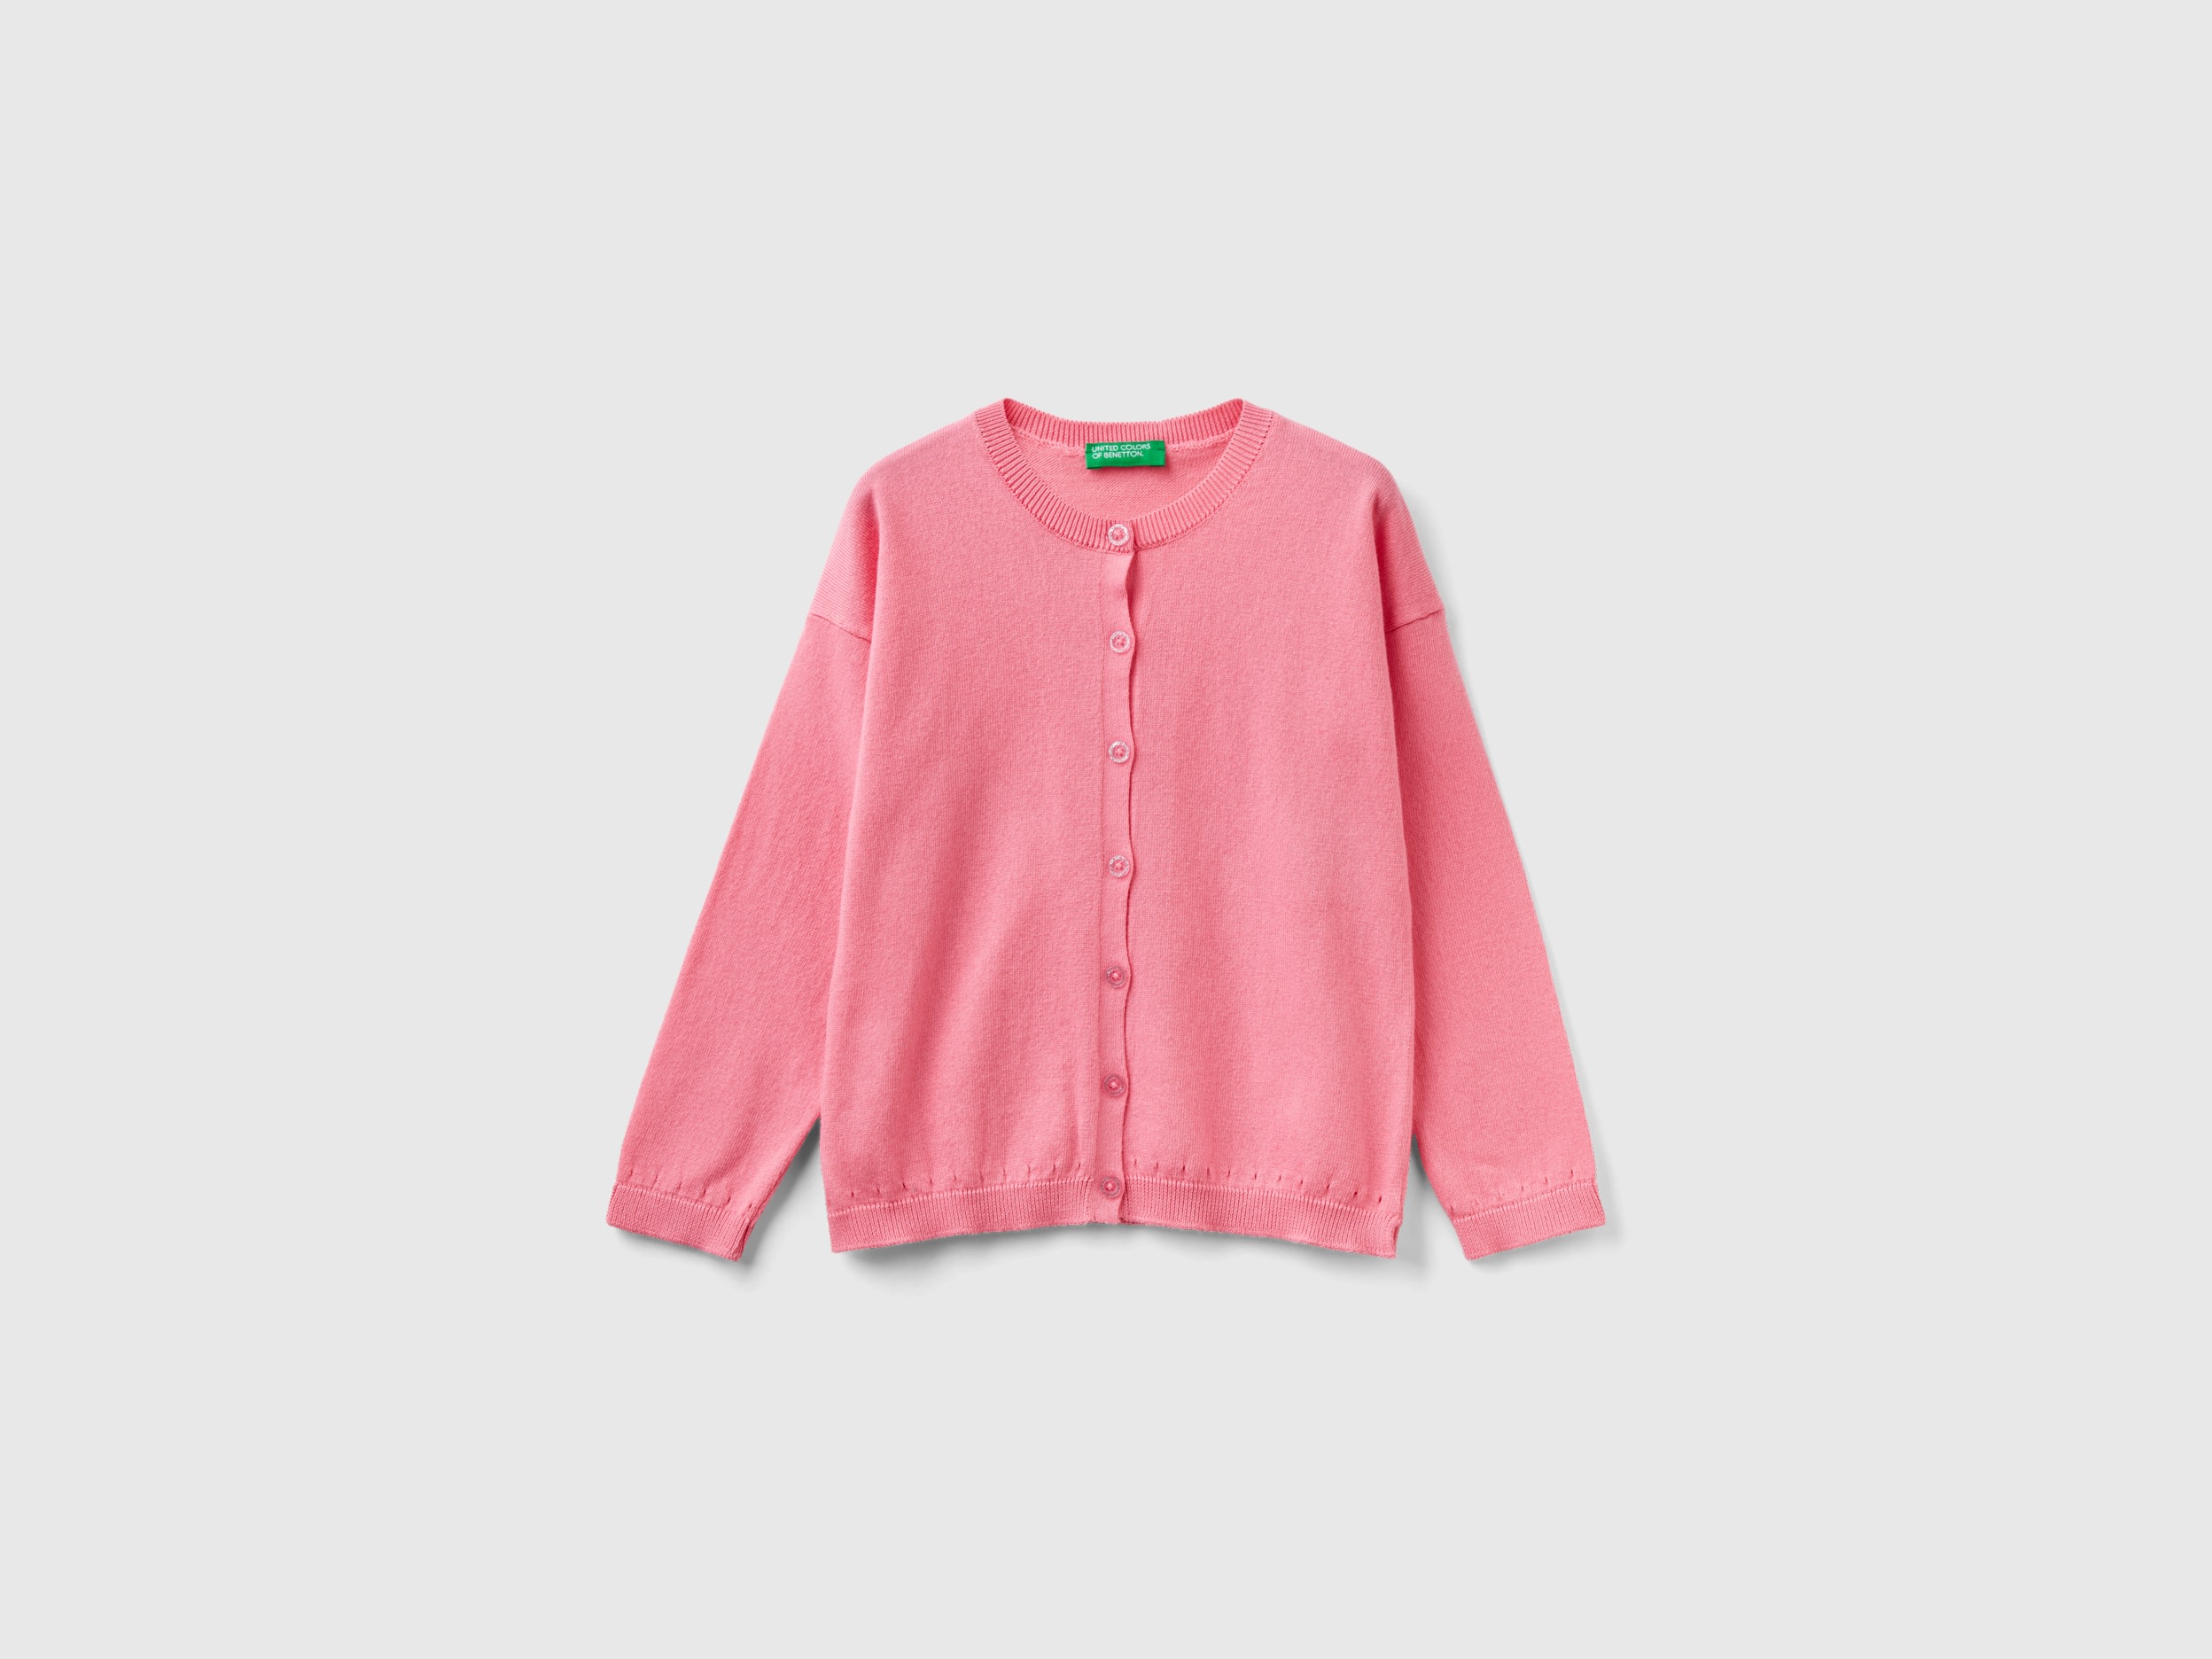 Benetton, Cardigan With Glittery Buttons, size 2-3, Pink, Kids